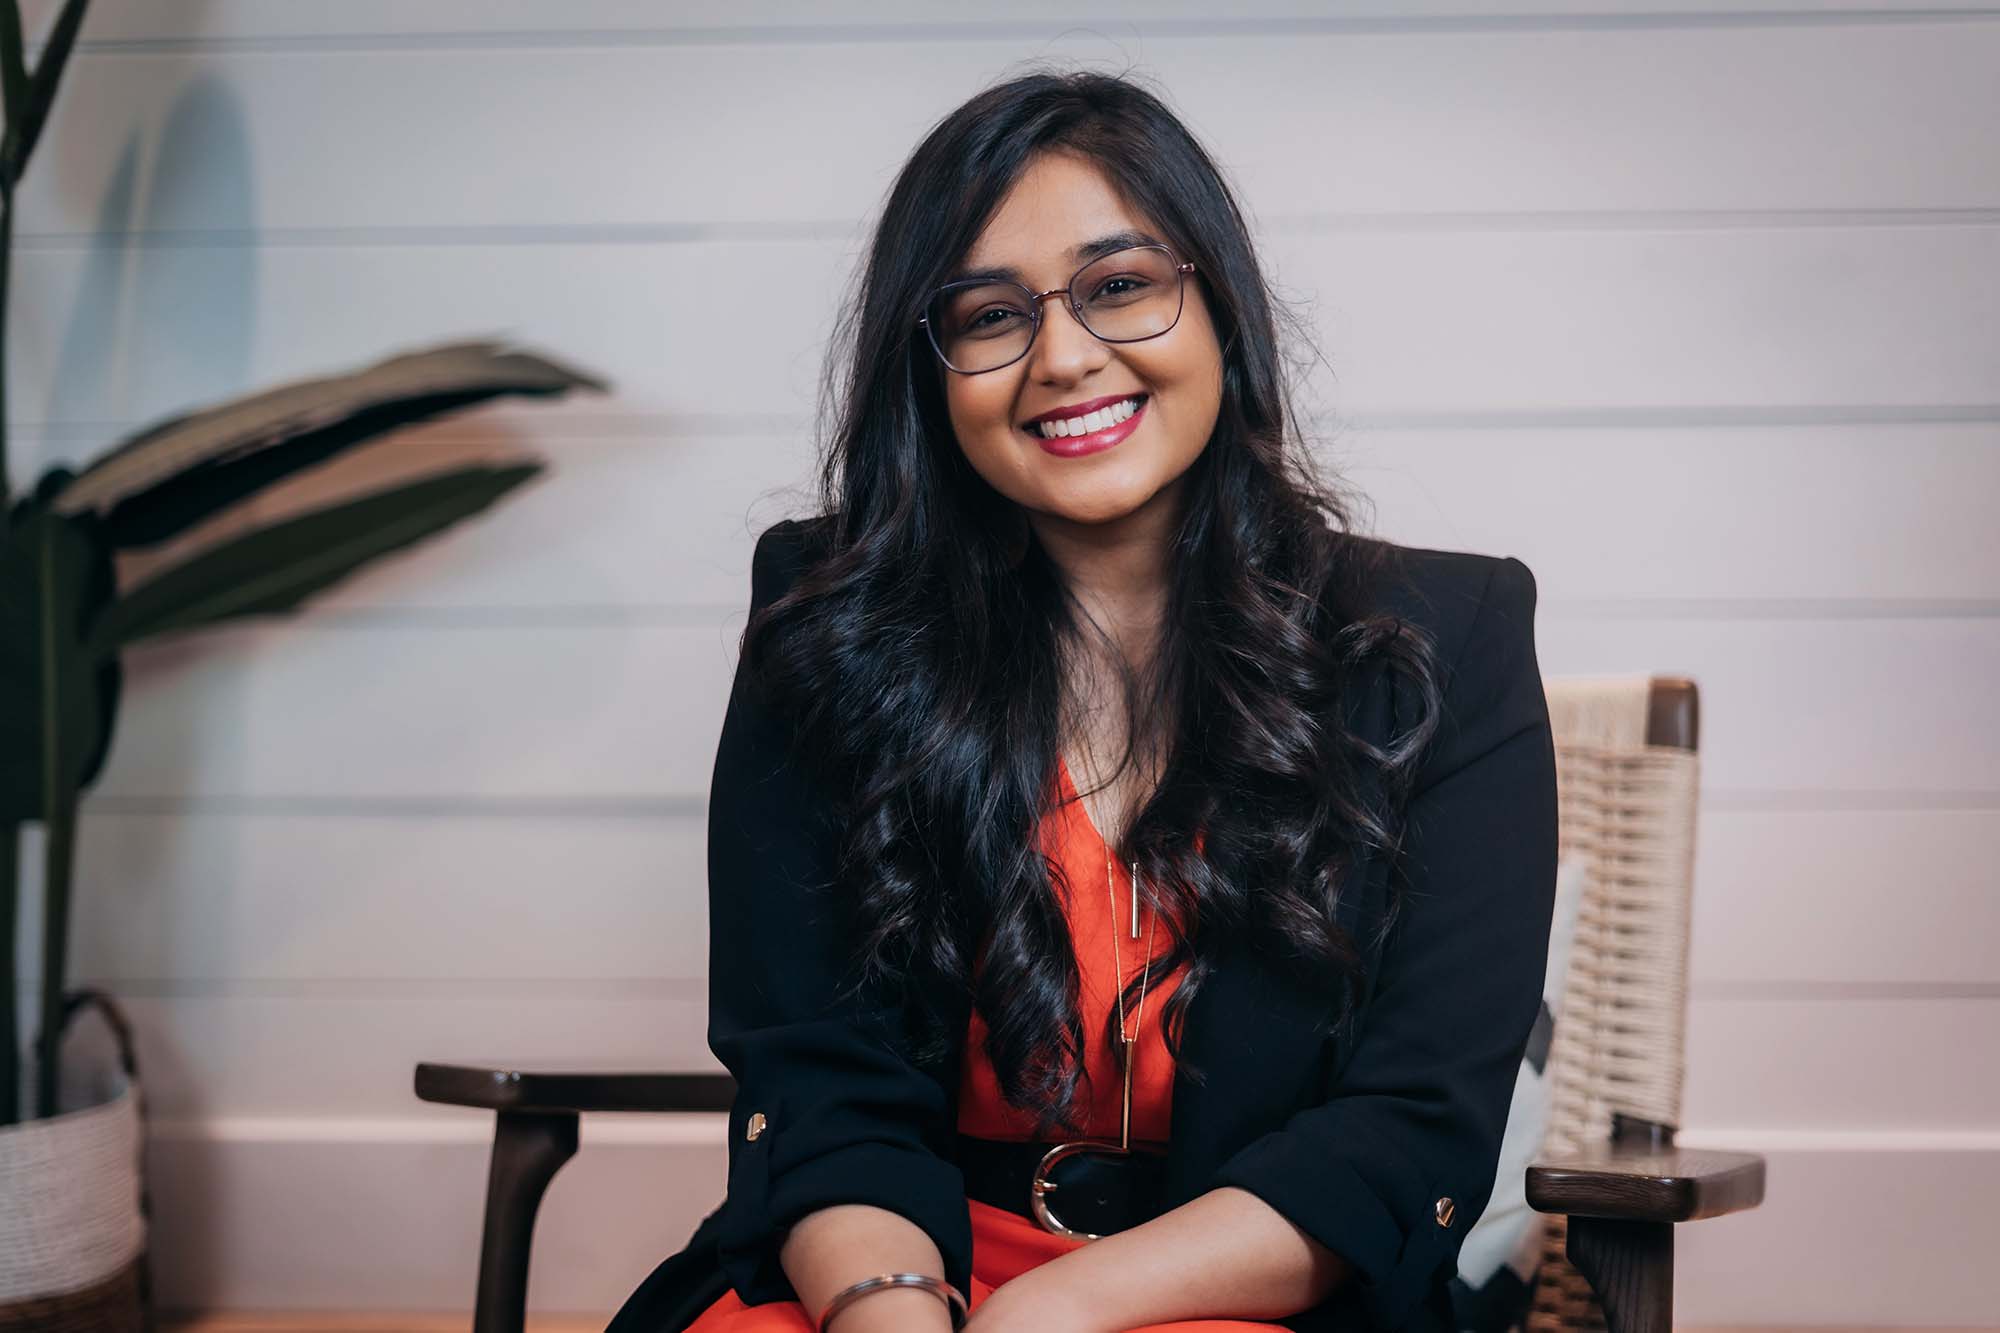 A person in business attire and glasses sits in a chair and smiles at the camera